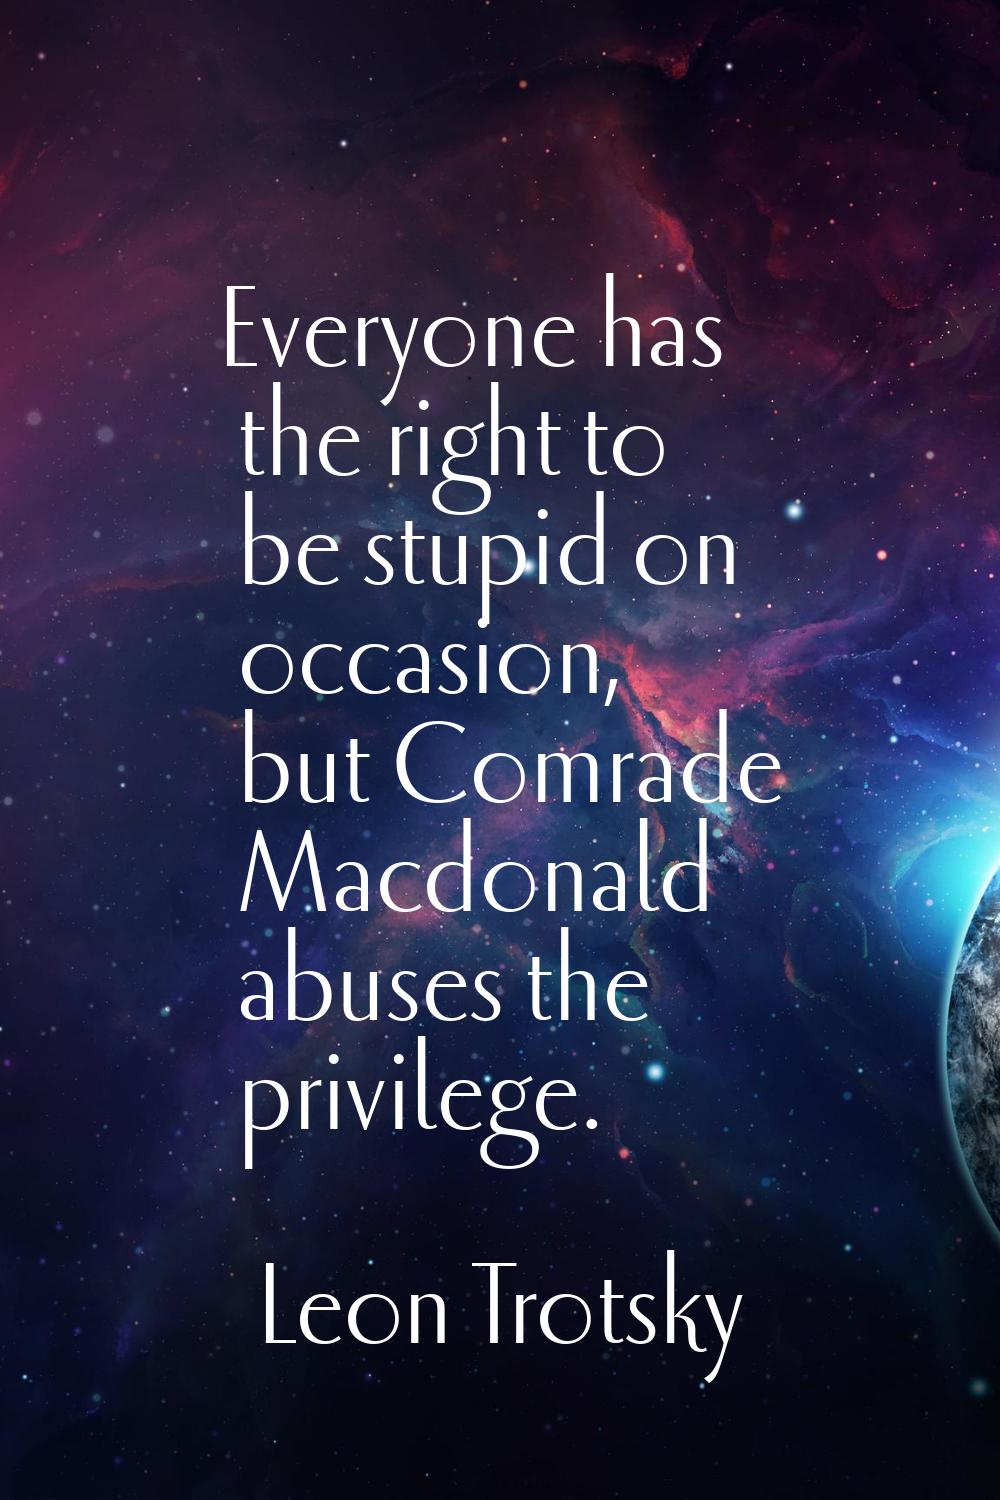 Everyone has the right to be stupid on occasion, but Comrade Macdonald abuses the privilege.